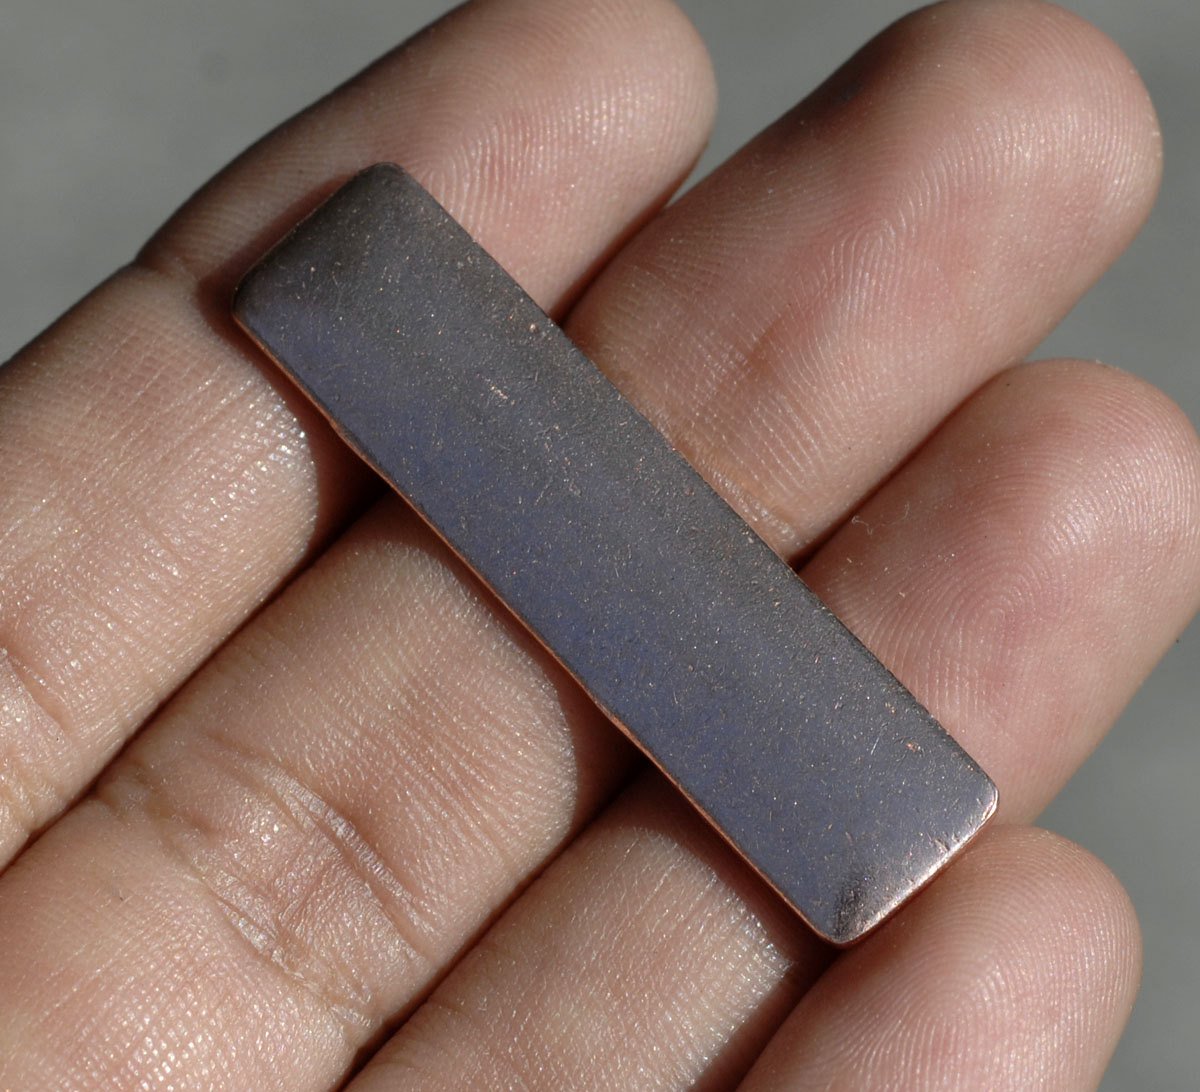 Rectangle 40mm x 10mm Blank Cutout Shape  for Enameling Stamping Texturing Blanks - Variety of Metals 4 pieces